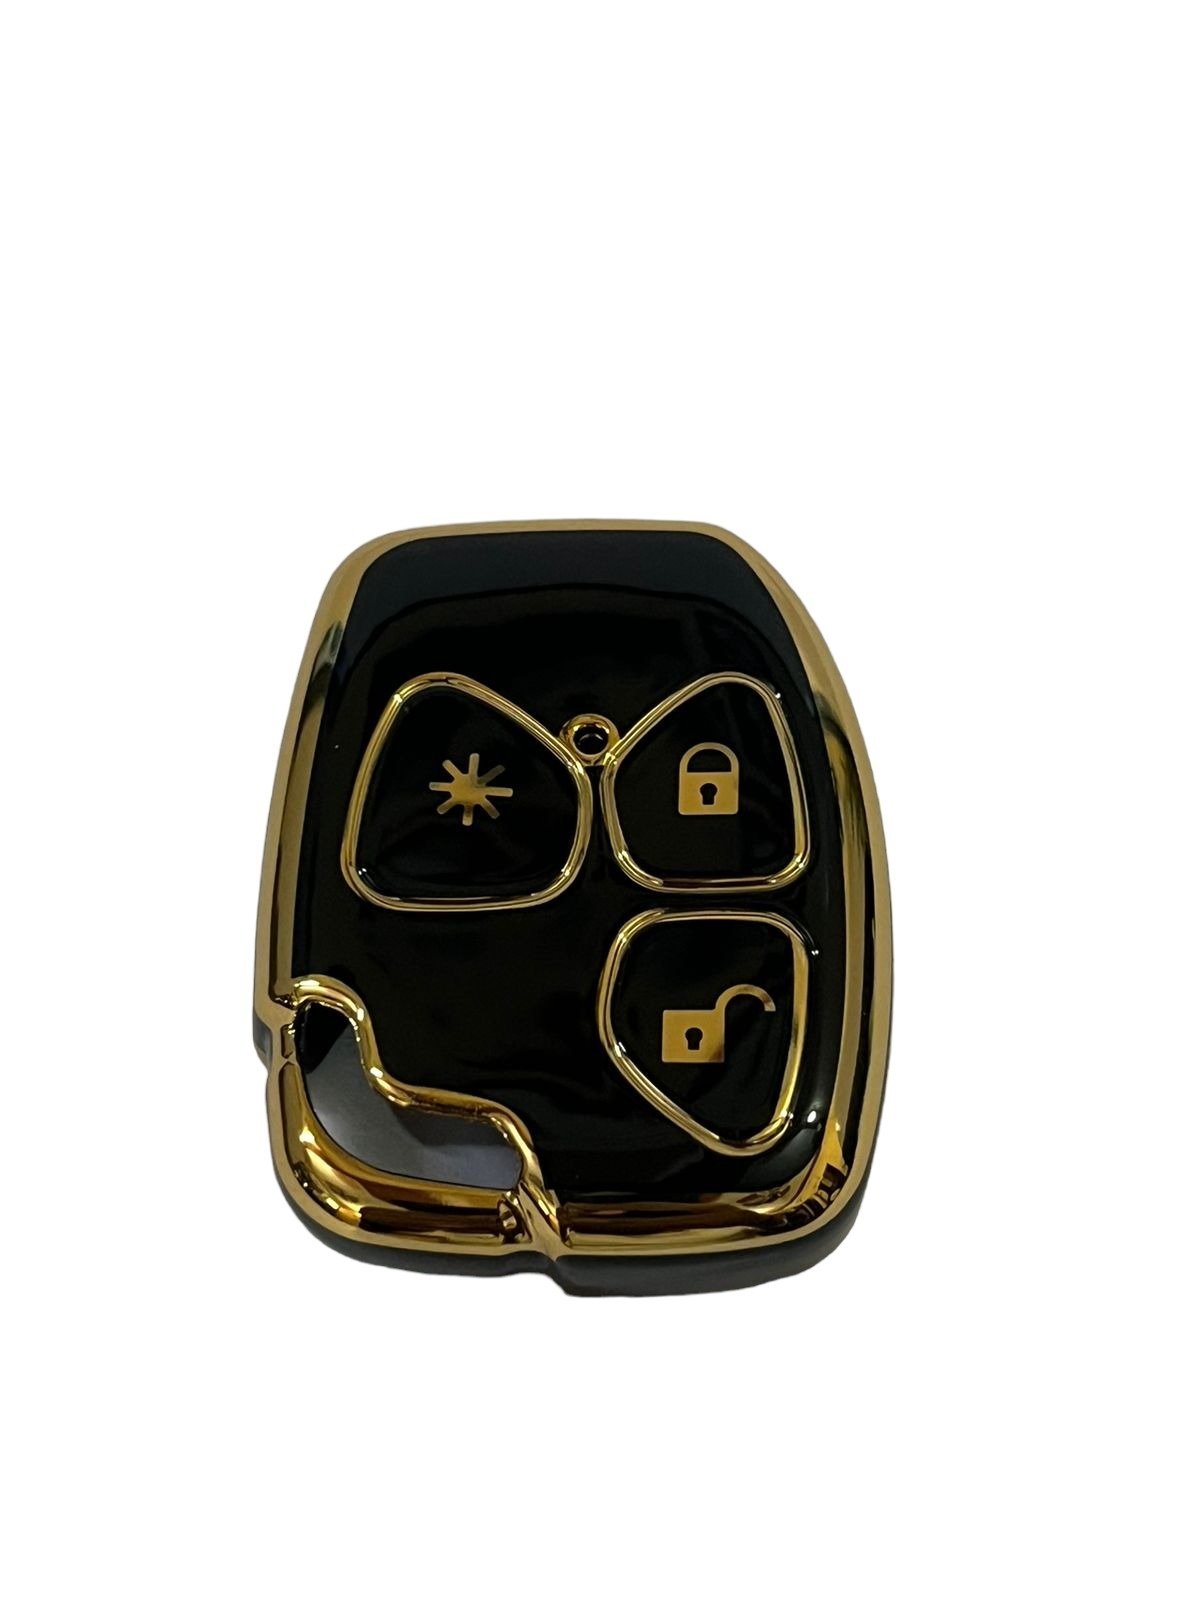  TPU Cover For Mahindra XYLO and Quanto Remote Key 3 Button (Gold/Black) Image 